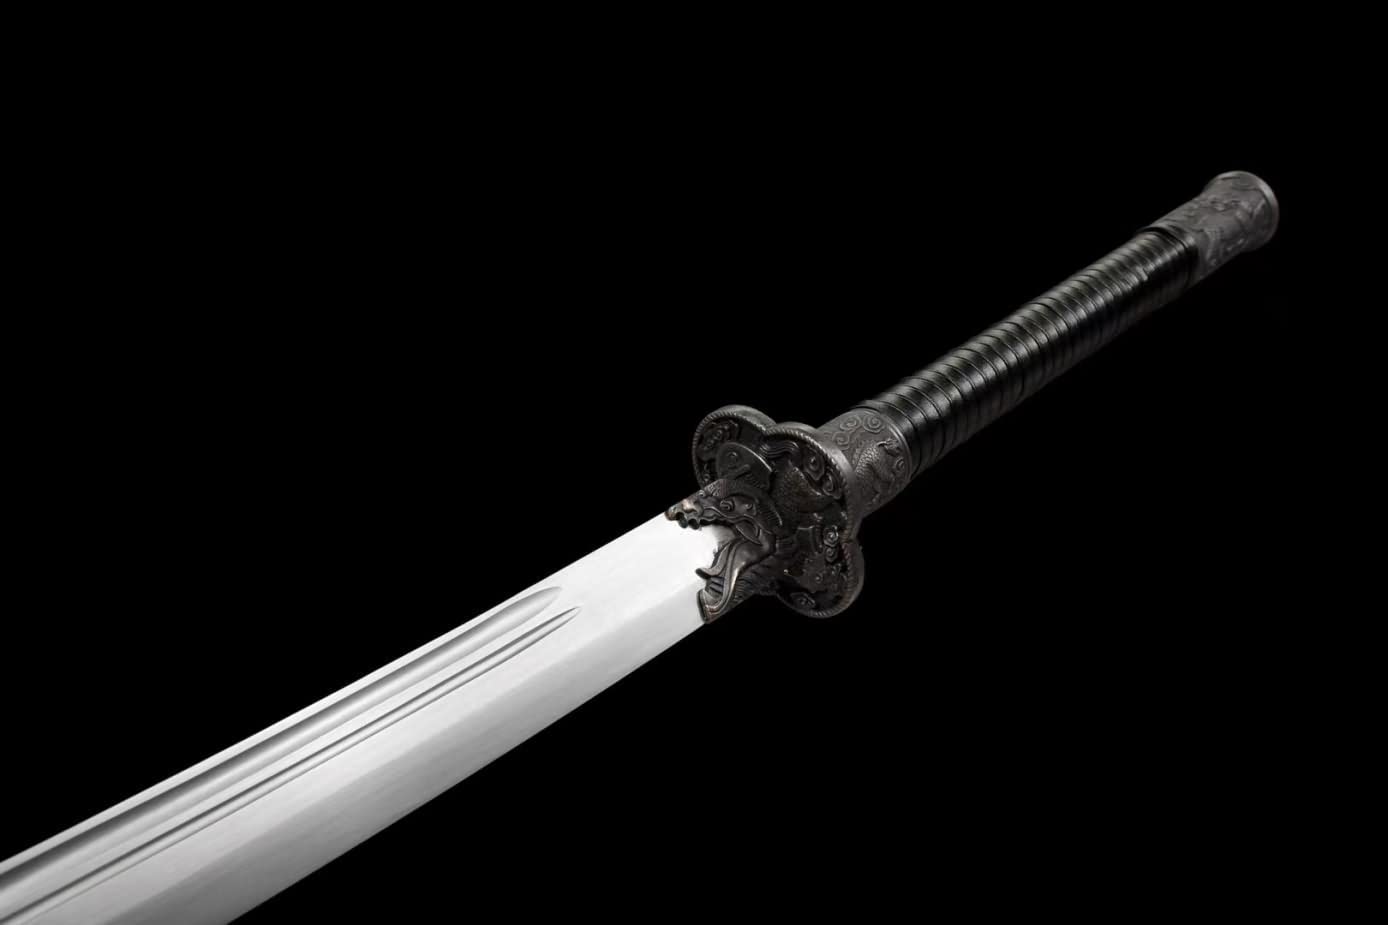 Kangxi dao,Forged high Carbon Steel Blade,Alloy Fittings,Black Scabbard,chinese sword